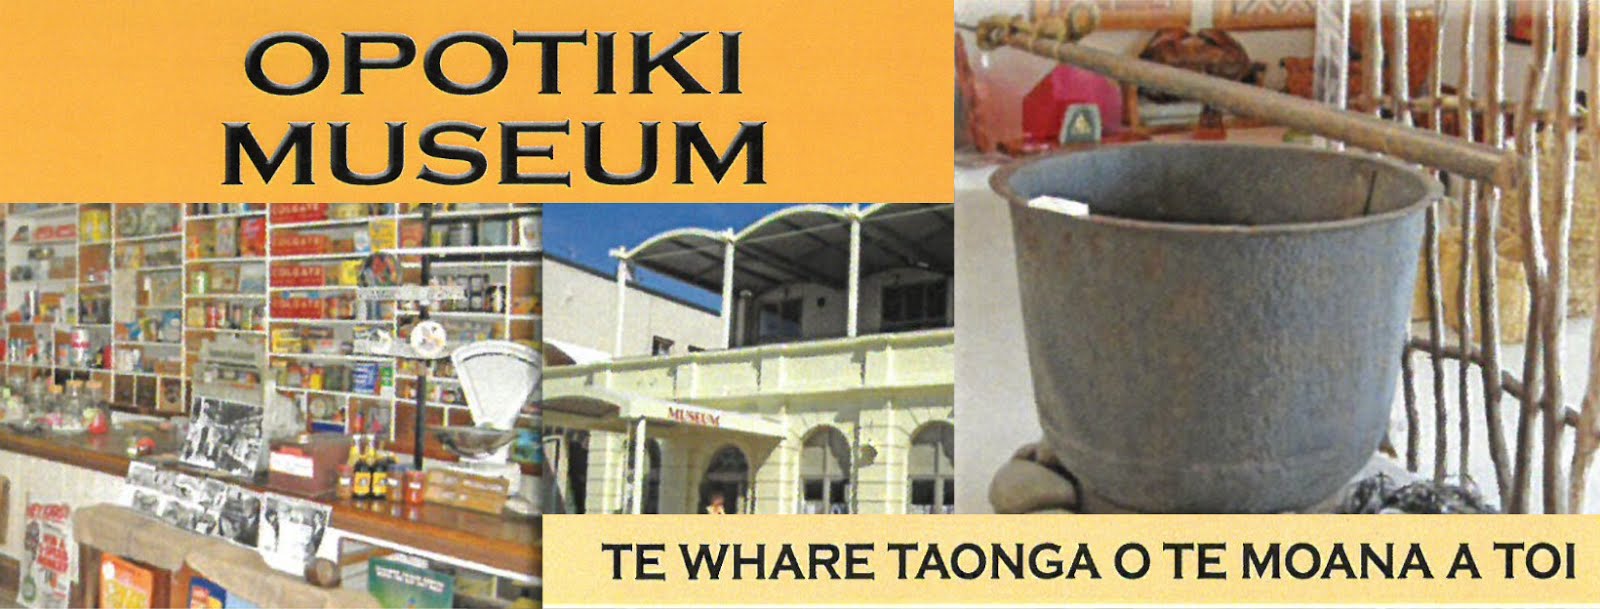 Supported by Ōpōtiki Museum